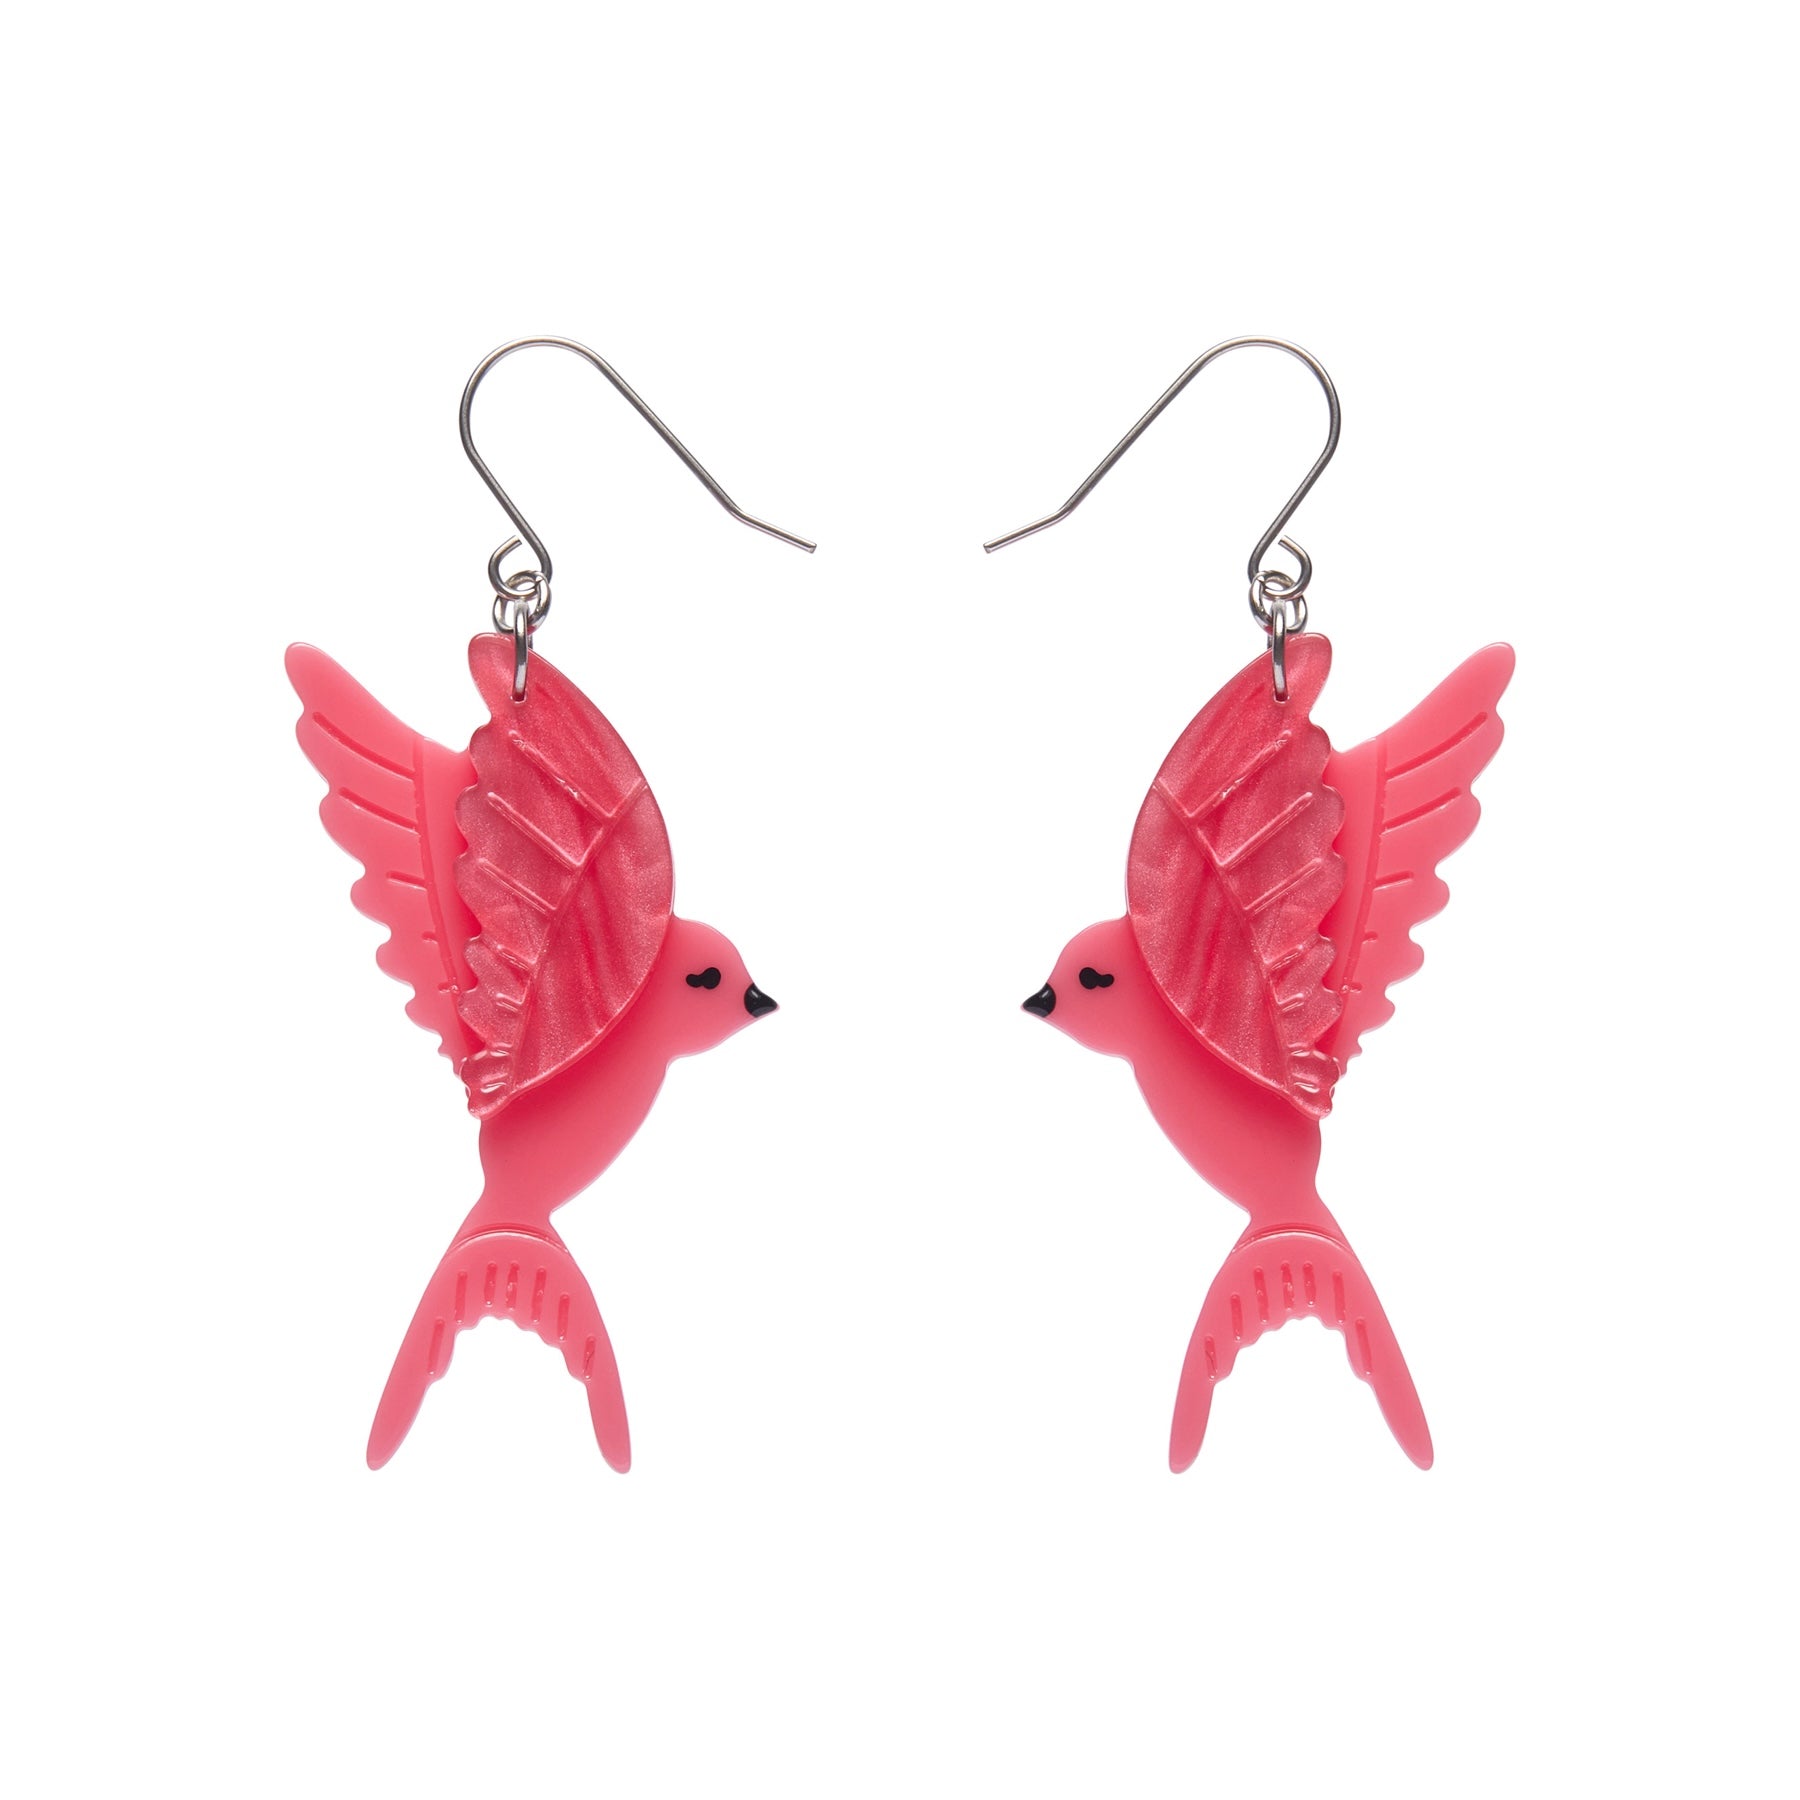 pair "Elodie and the Melody" pink birdie layered resin dangle earrings